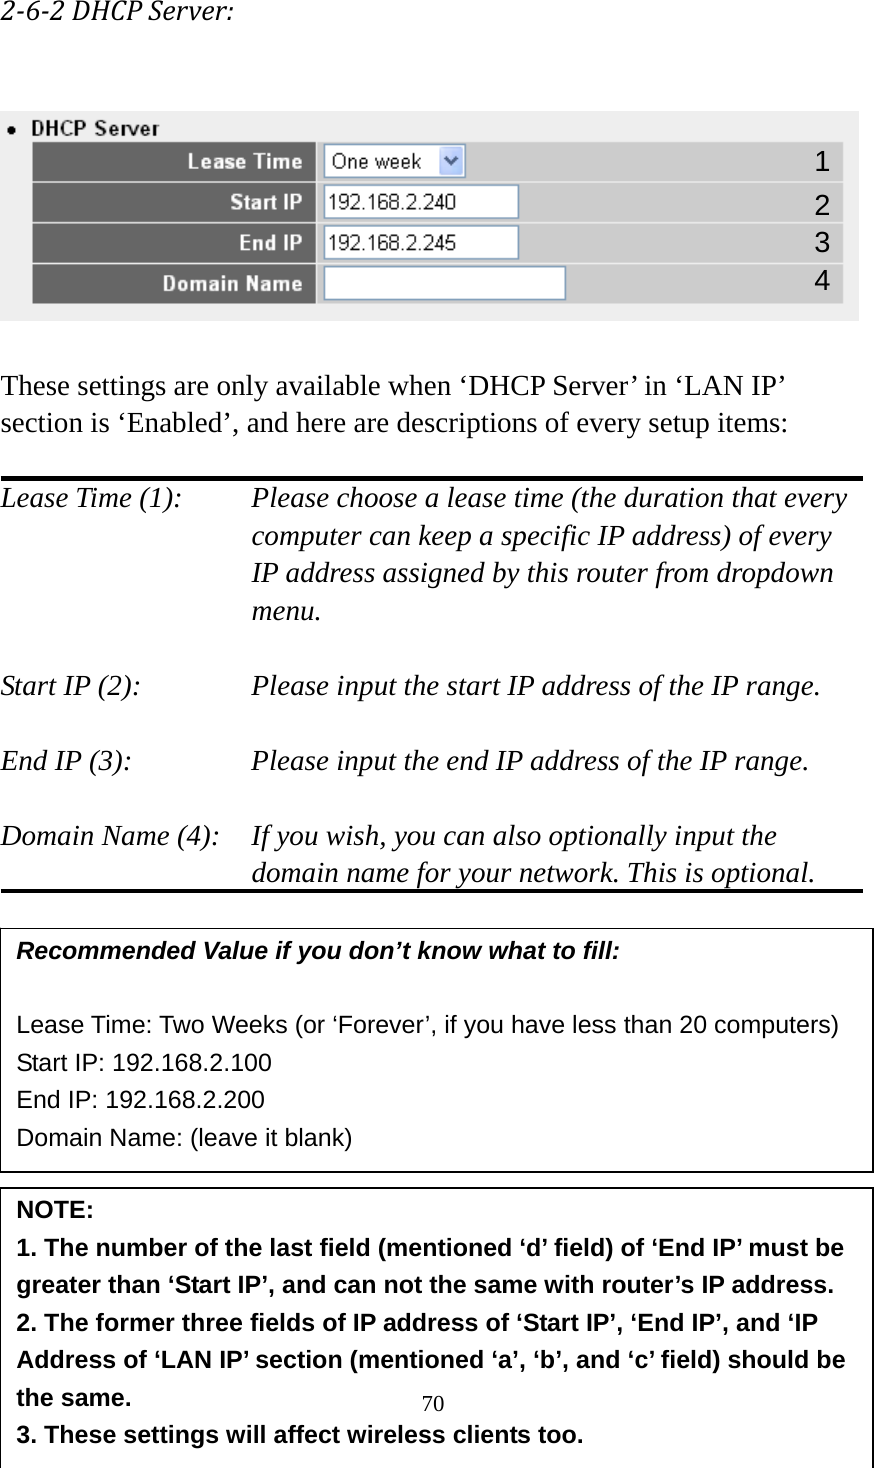 70  262DHCPServer:   These settings are only available when ‘DHCP Server’ in ‘LAN IP’ section is ‘Enabled’, and here are descriptions of every setup items:  Lease Time (1):    Please choose a lease time (the duration that every computer can keep a specific IP address) of every IP address assigned by this router from dropdown menu.  Start IP (2):      Please input the start IP address of the IP range.  End IP (3):       Please input the end IP address of the IP range.  Domain Name (4):    If you wish, you can also optionally input the domain name for your network. This is optional.             Recommended Value if you don’t know what to fill:  Lease Time: Two Weeks (or ‘Forever’, if you have less than 20 computers) Start IP: 192.168.2.100 End IP: 192.168.2.200 Domain Name: (leave it blank) NOTE:  1. The number of the last field (mentioned ‘d’ field) of ‘End IP’ must be greater than ‘Start IP’, and can not the same with router’s IP address. 2. The former three fields of IP address of ‘Start IP’, ‘End IP’, and ‘IP Address of ‘LAN IP’ section (mentioned ‘a’, ‘b’, and ‘c’ field) should be the same. 3. These settings will affect wireless clients too. 1 3 4 2 